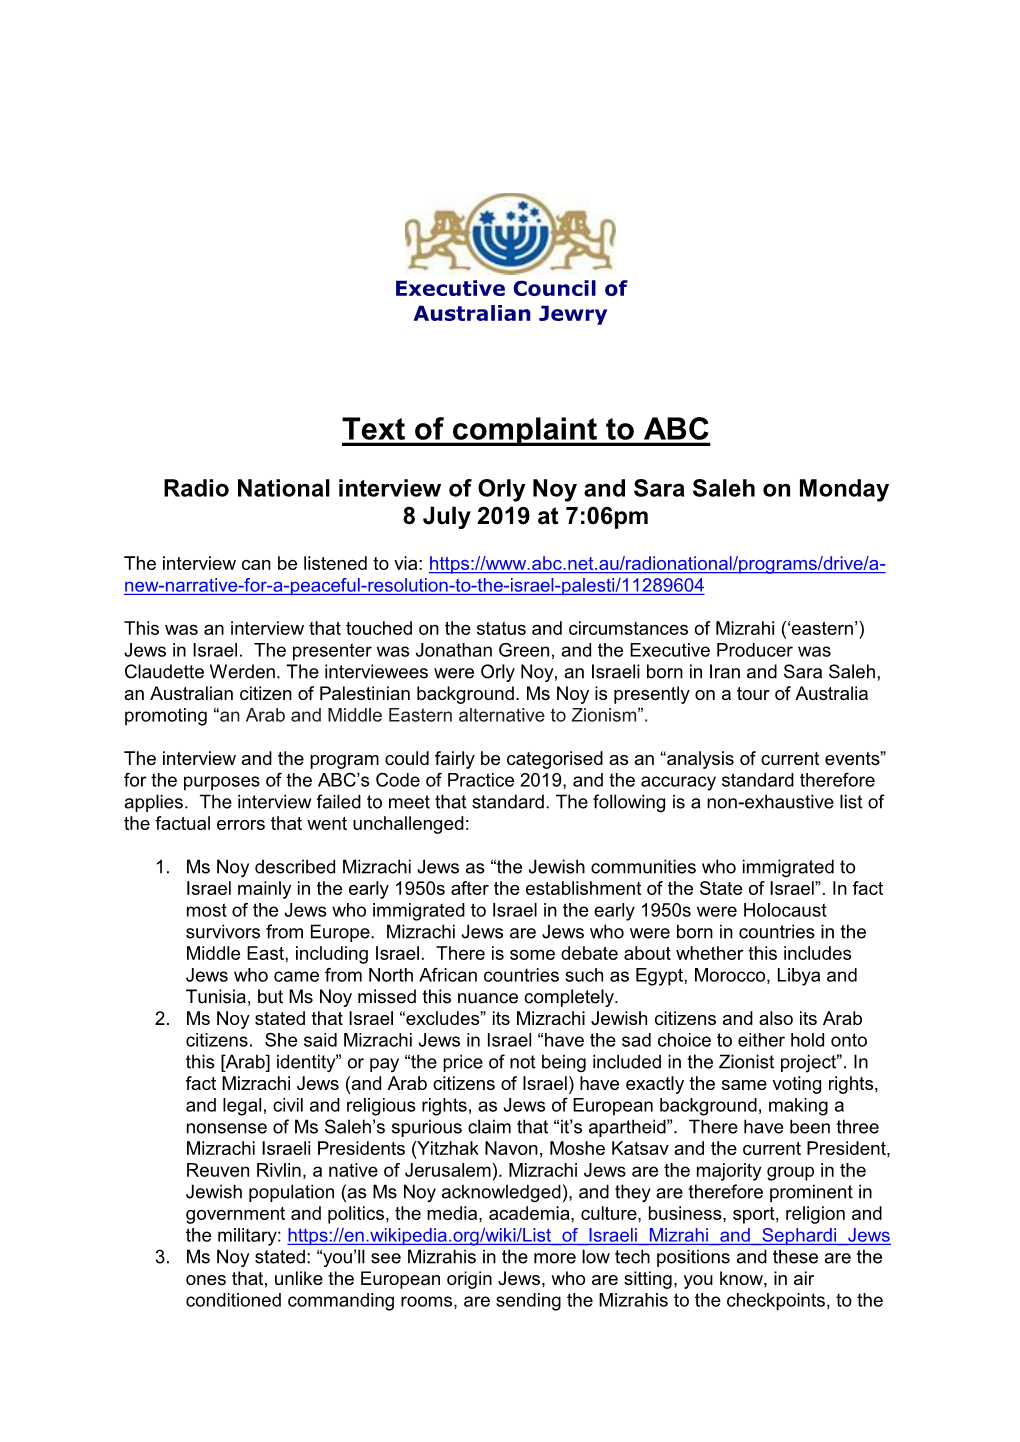 Text of Complaint to ABC